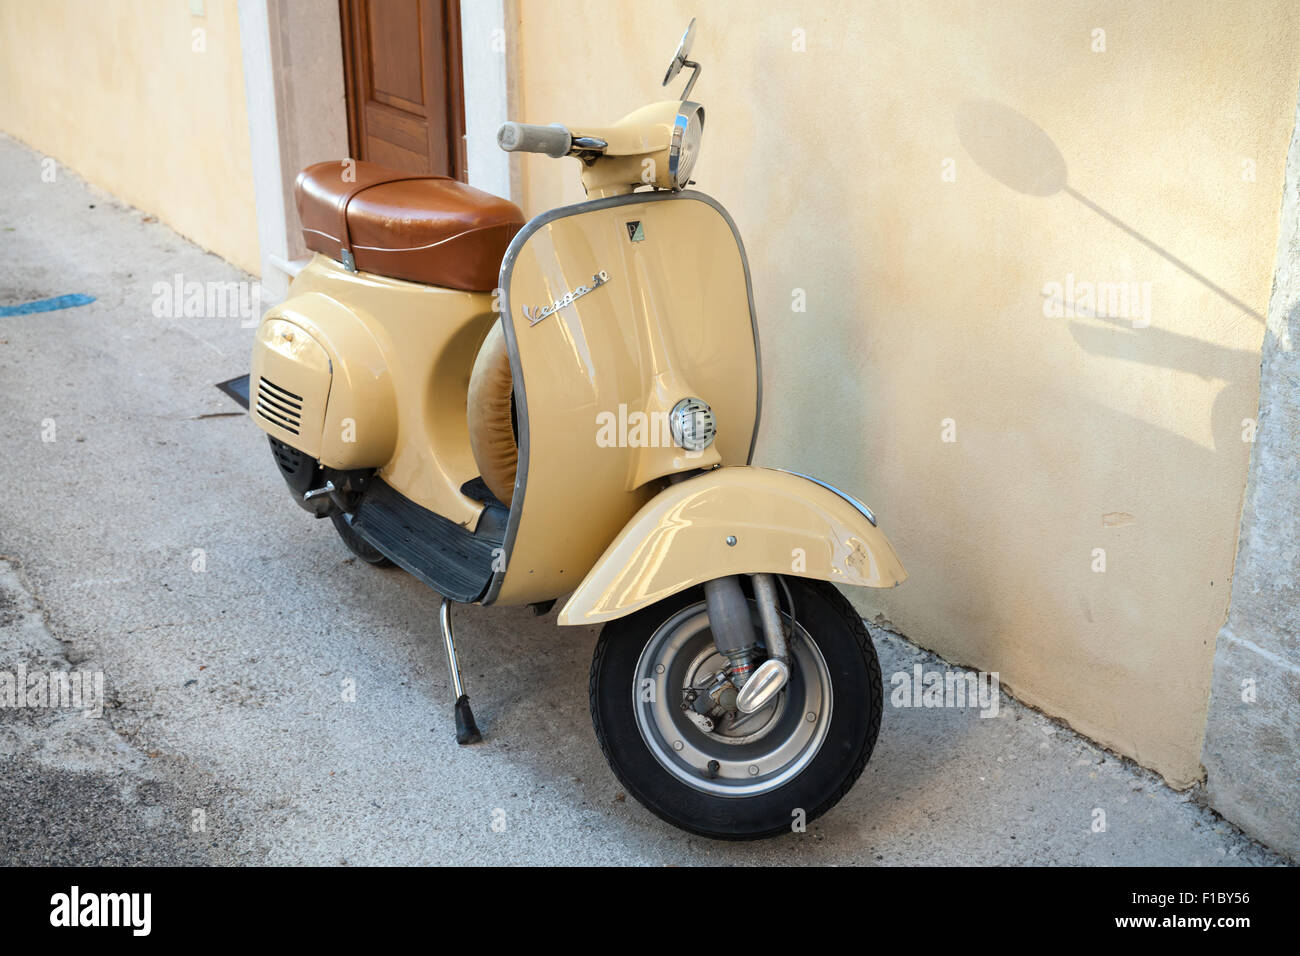 Gaeta, Italy - August 19, 2015: Classic yellow Vespa scooter stands parked near wall Stock Photo